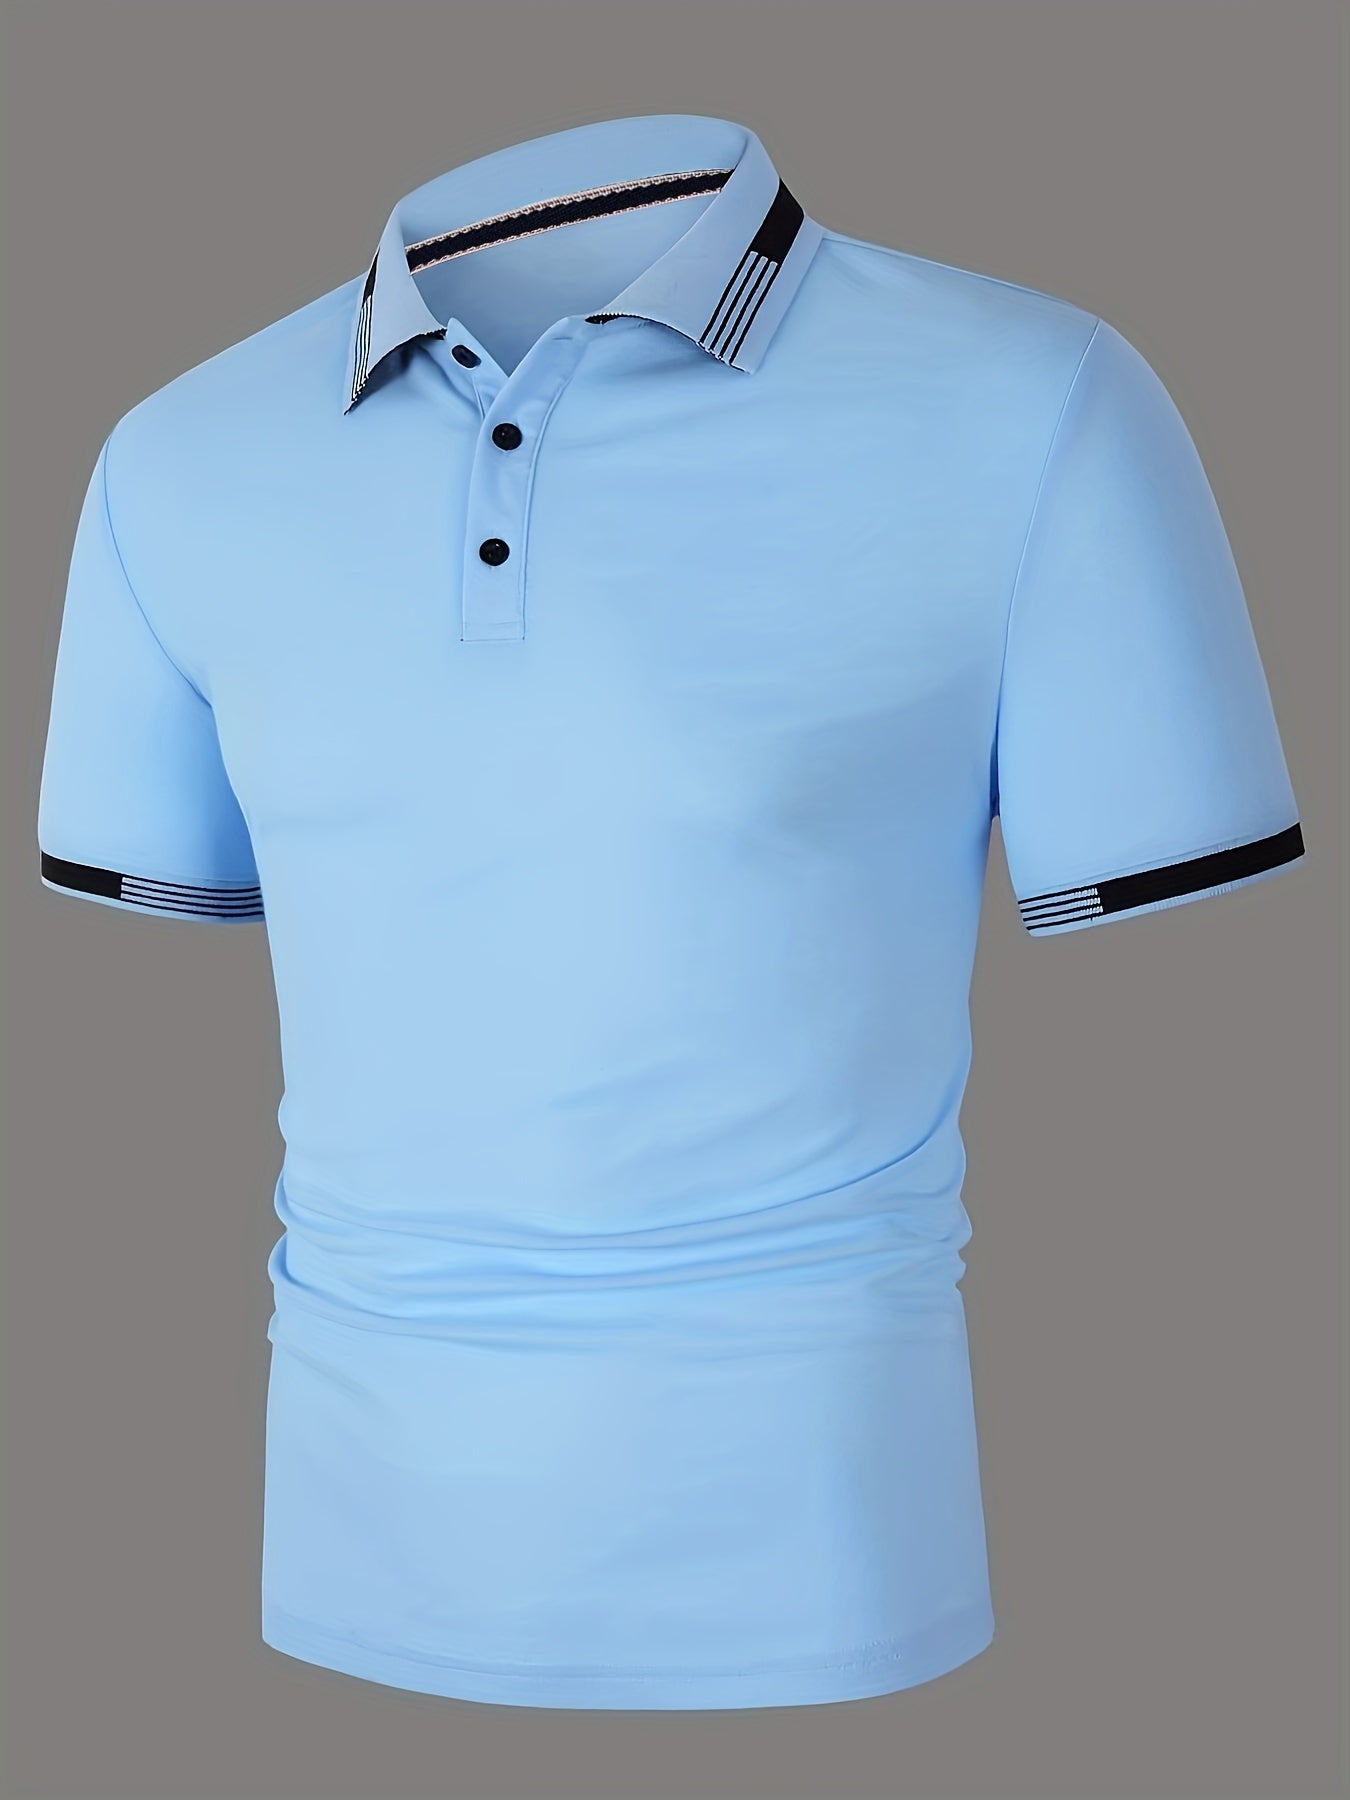 Men's Causal V-neck Button Up Short Sleeve Polo Shirts Men's Comfortable Tops For Summer